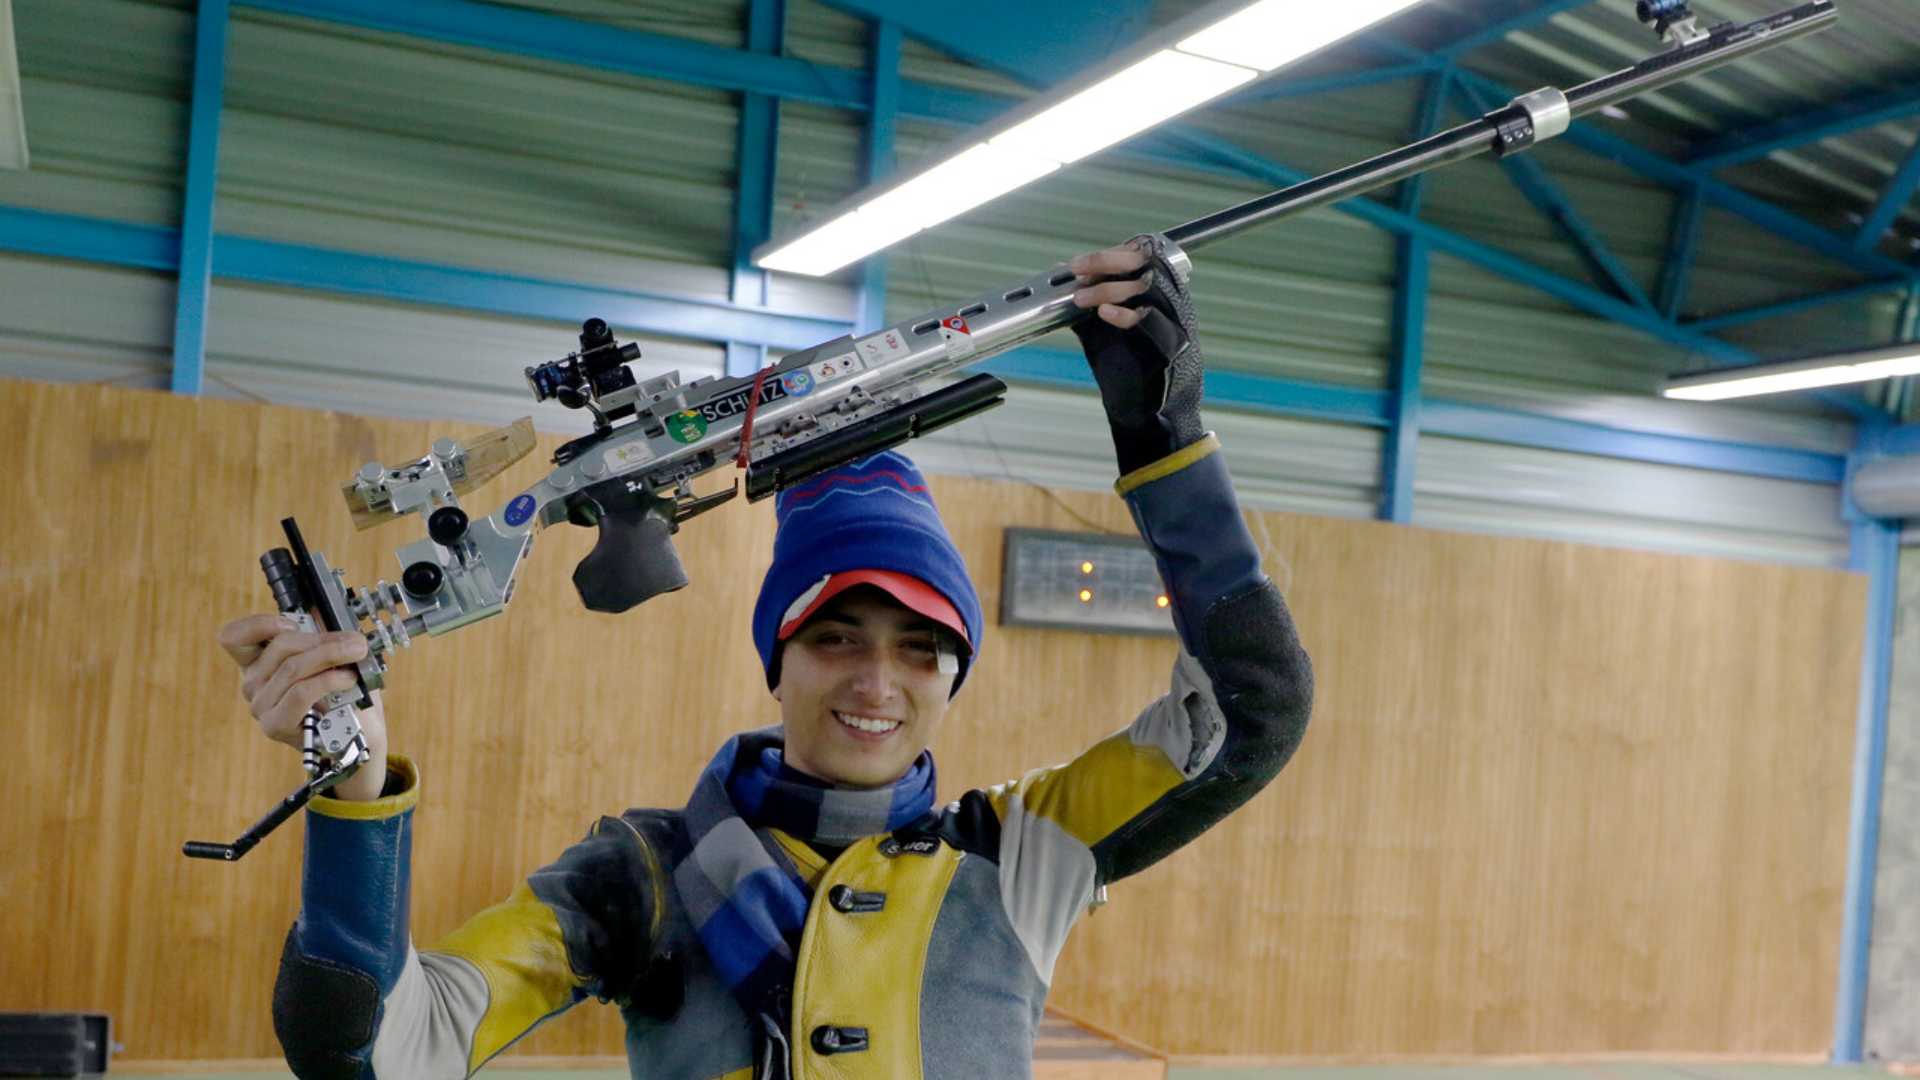 Shooting: Carlos Quezada wins the male's 3x20 rifle and qualifies for Paris 2024